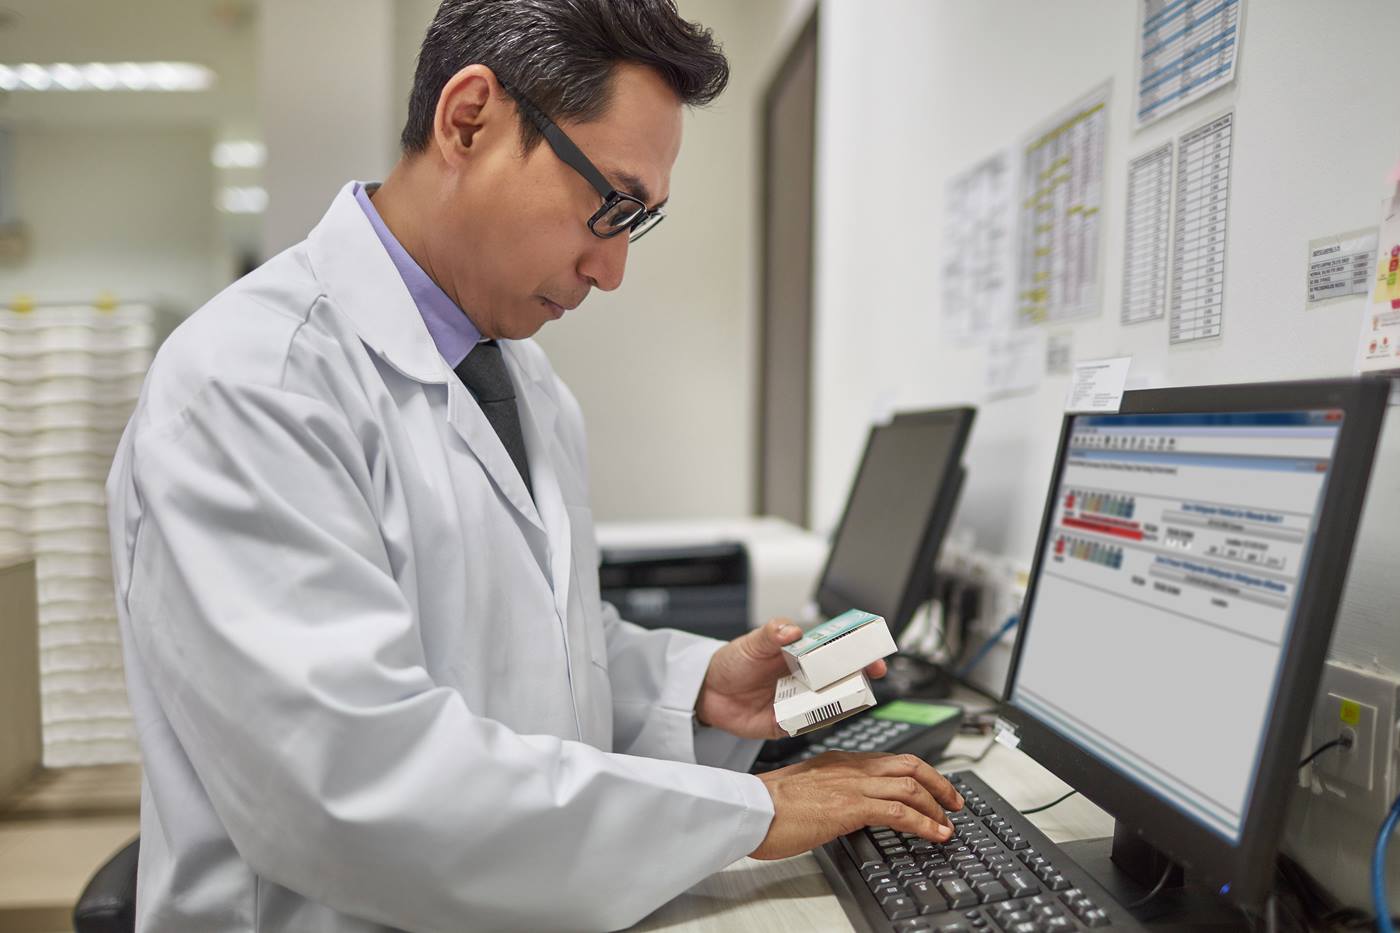 AutoPharm Workflow Efficiency: Automates receiving, restocking, dispensing and returns.